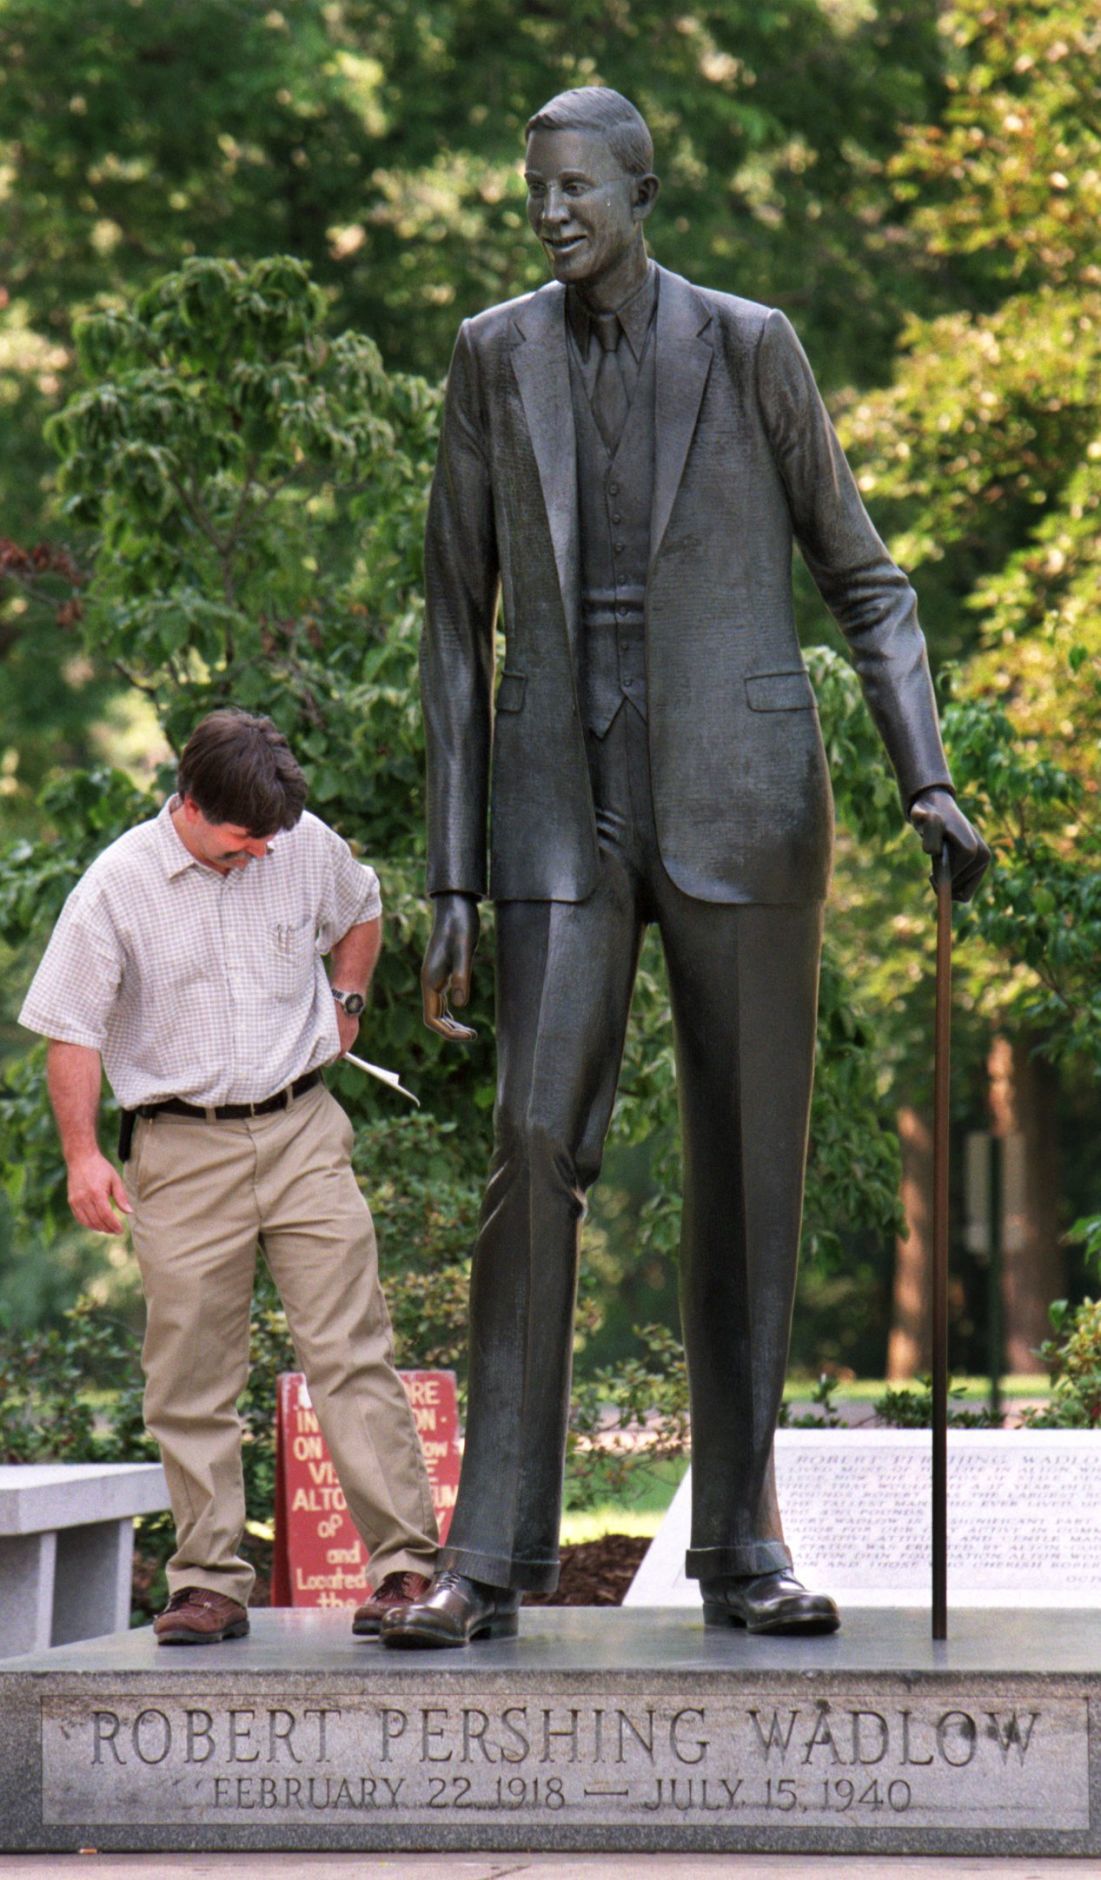 100 Facts About Alton S Gentle Giant Robert Wadlow